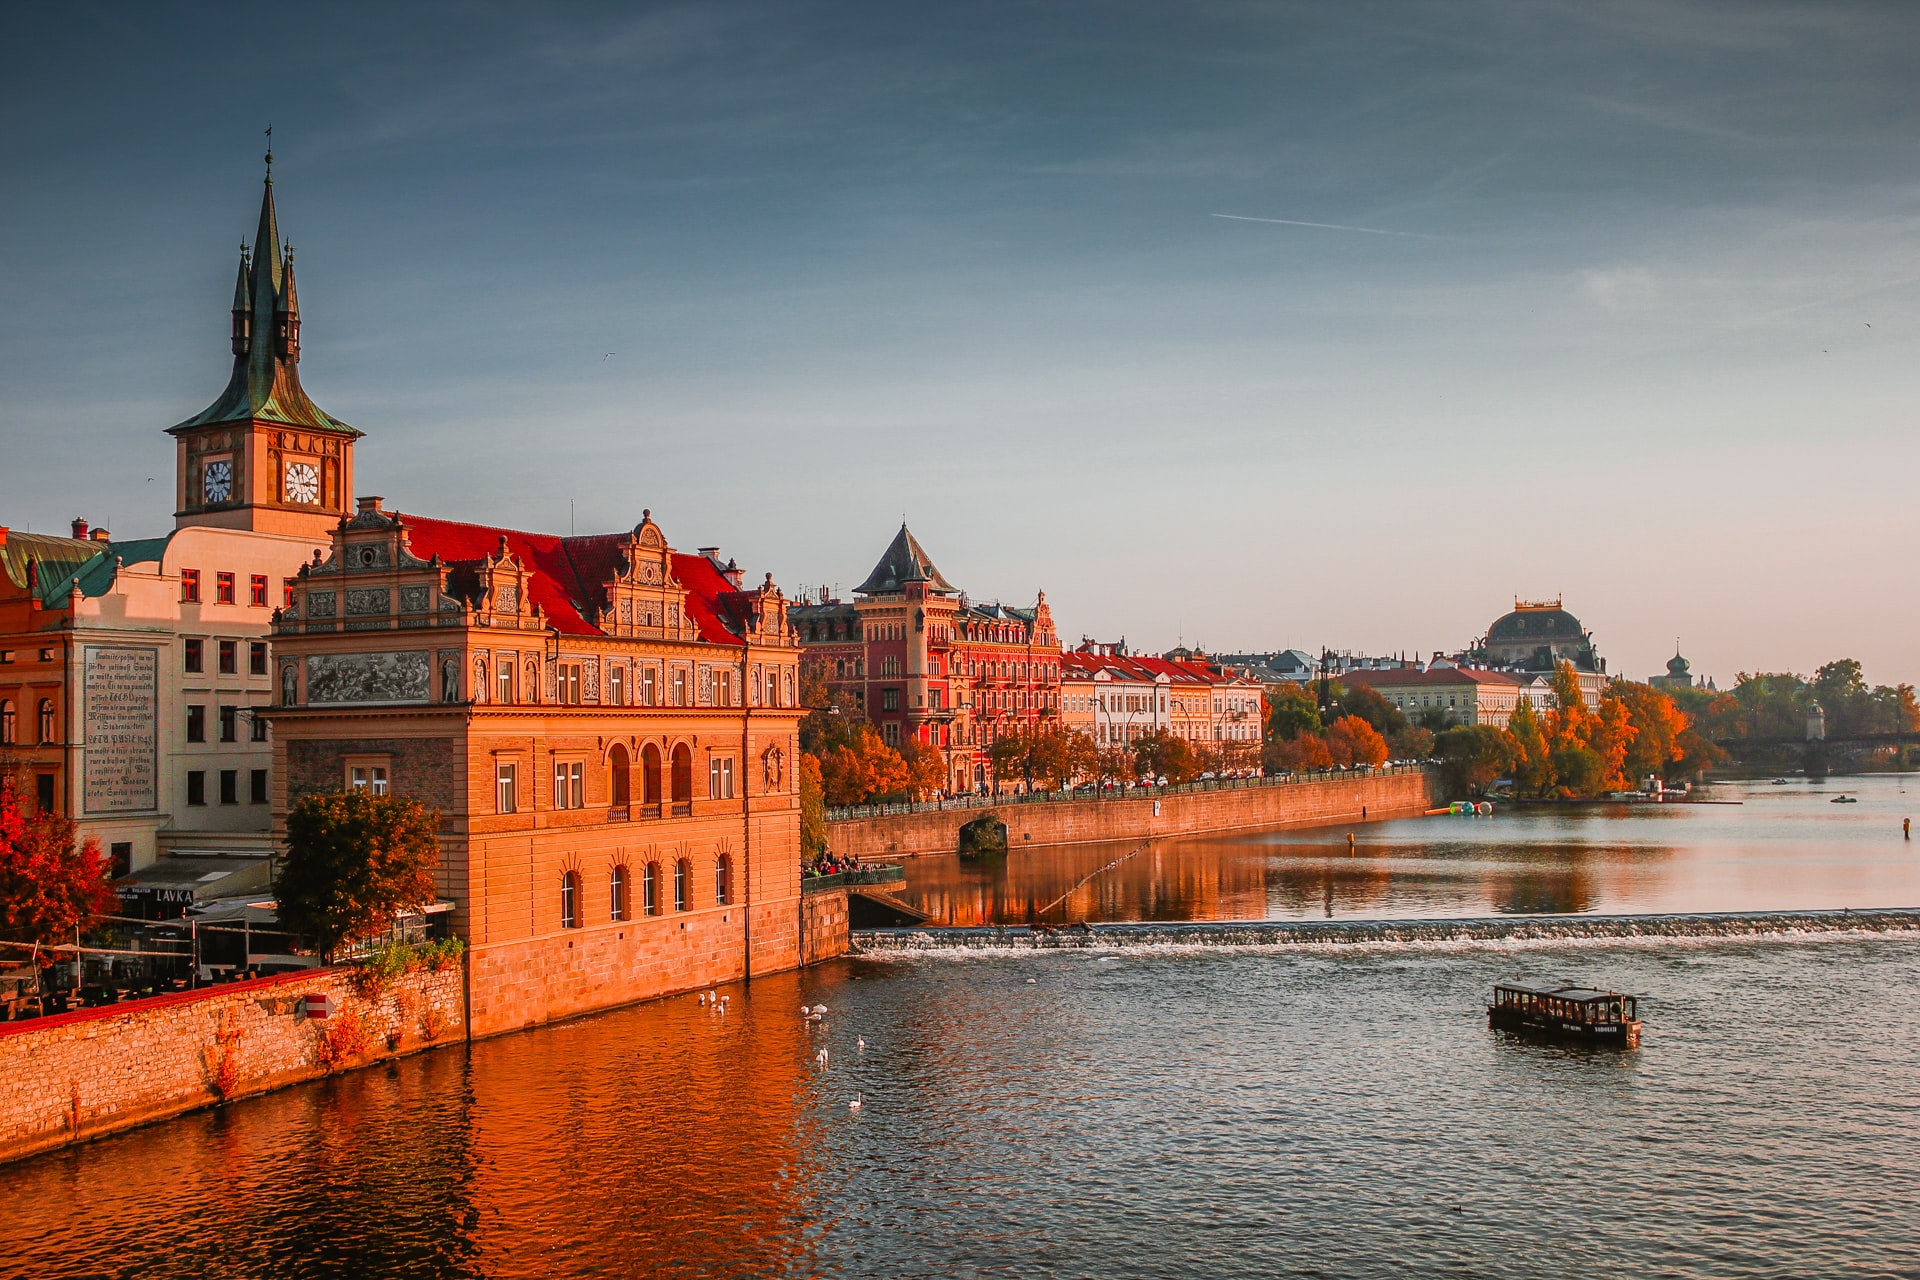 Could Cannabis Reform in the Czech Republic Tip the Rest of Europe on Regional Change?